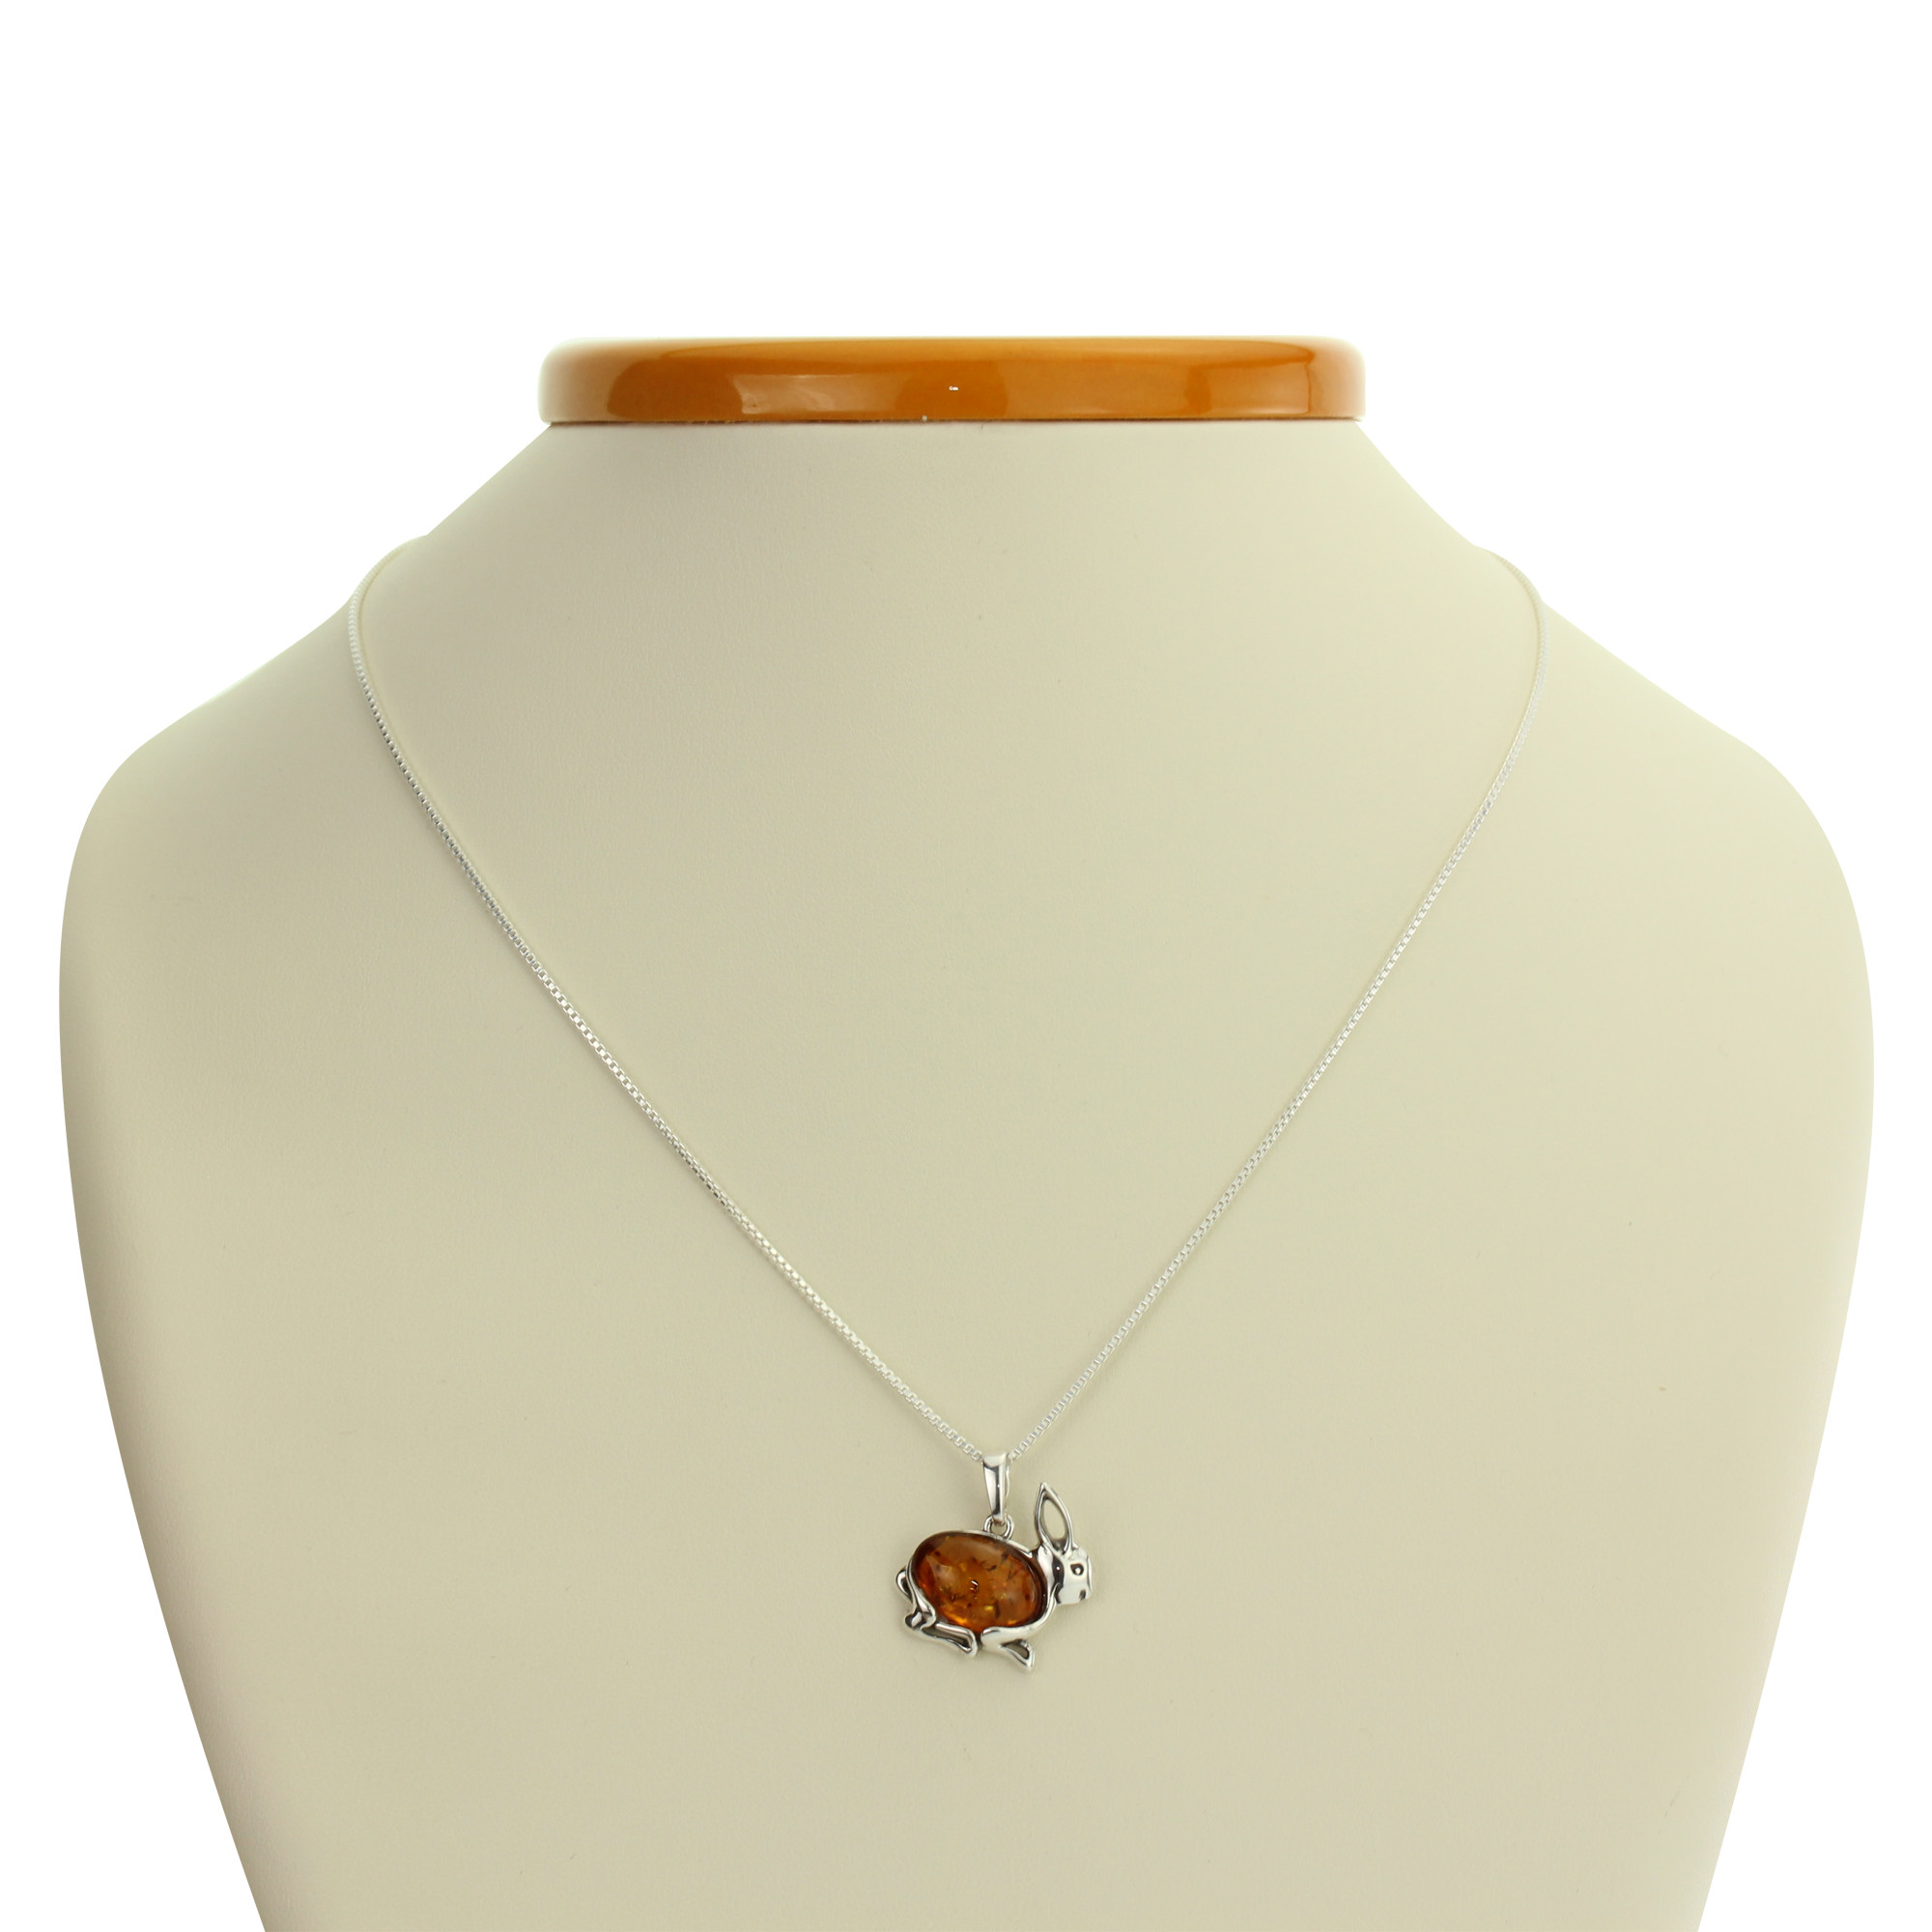 BALTIC AMBER AND STERLING SILVER 925 RABBIT PENDANT NECKLACE 14 16 18 20 22 24 26 28 30 32 34 1mm ITALIAN SNAKE CHAIN